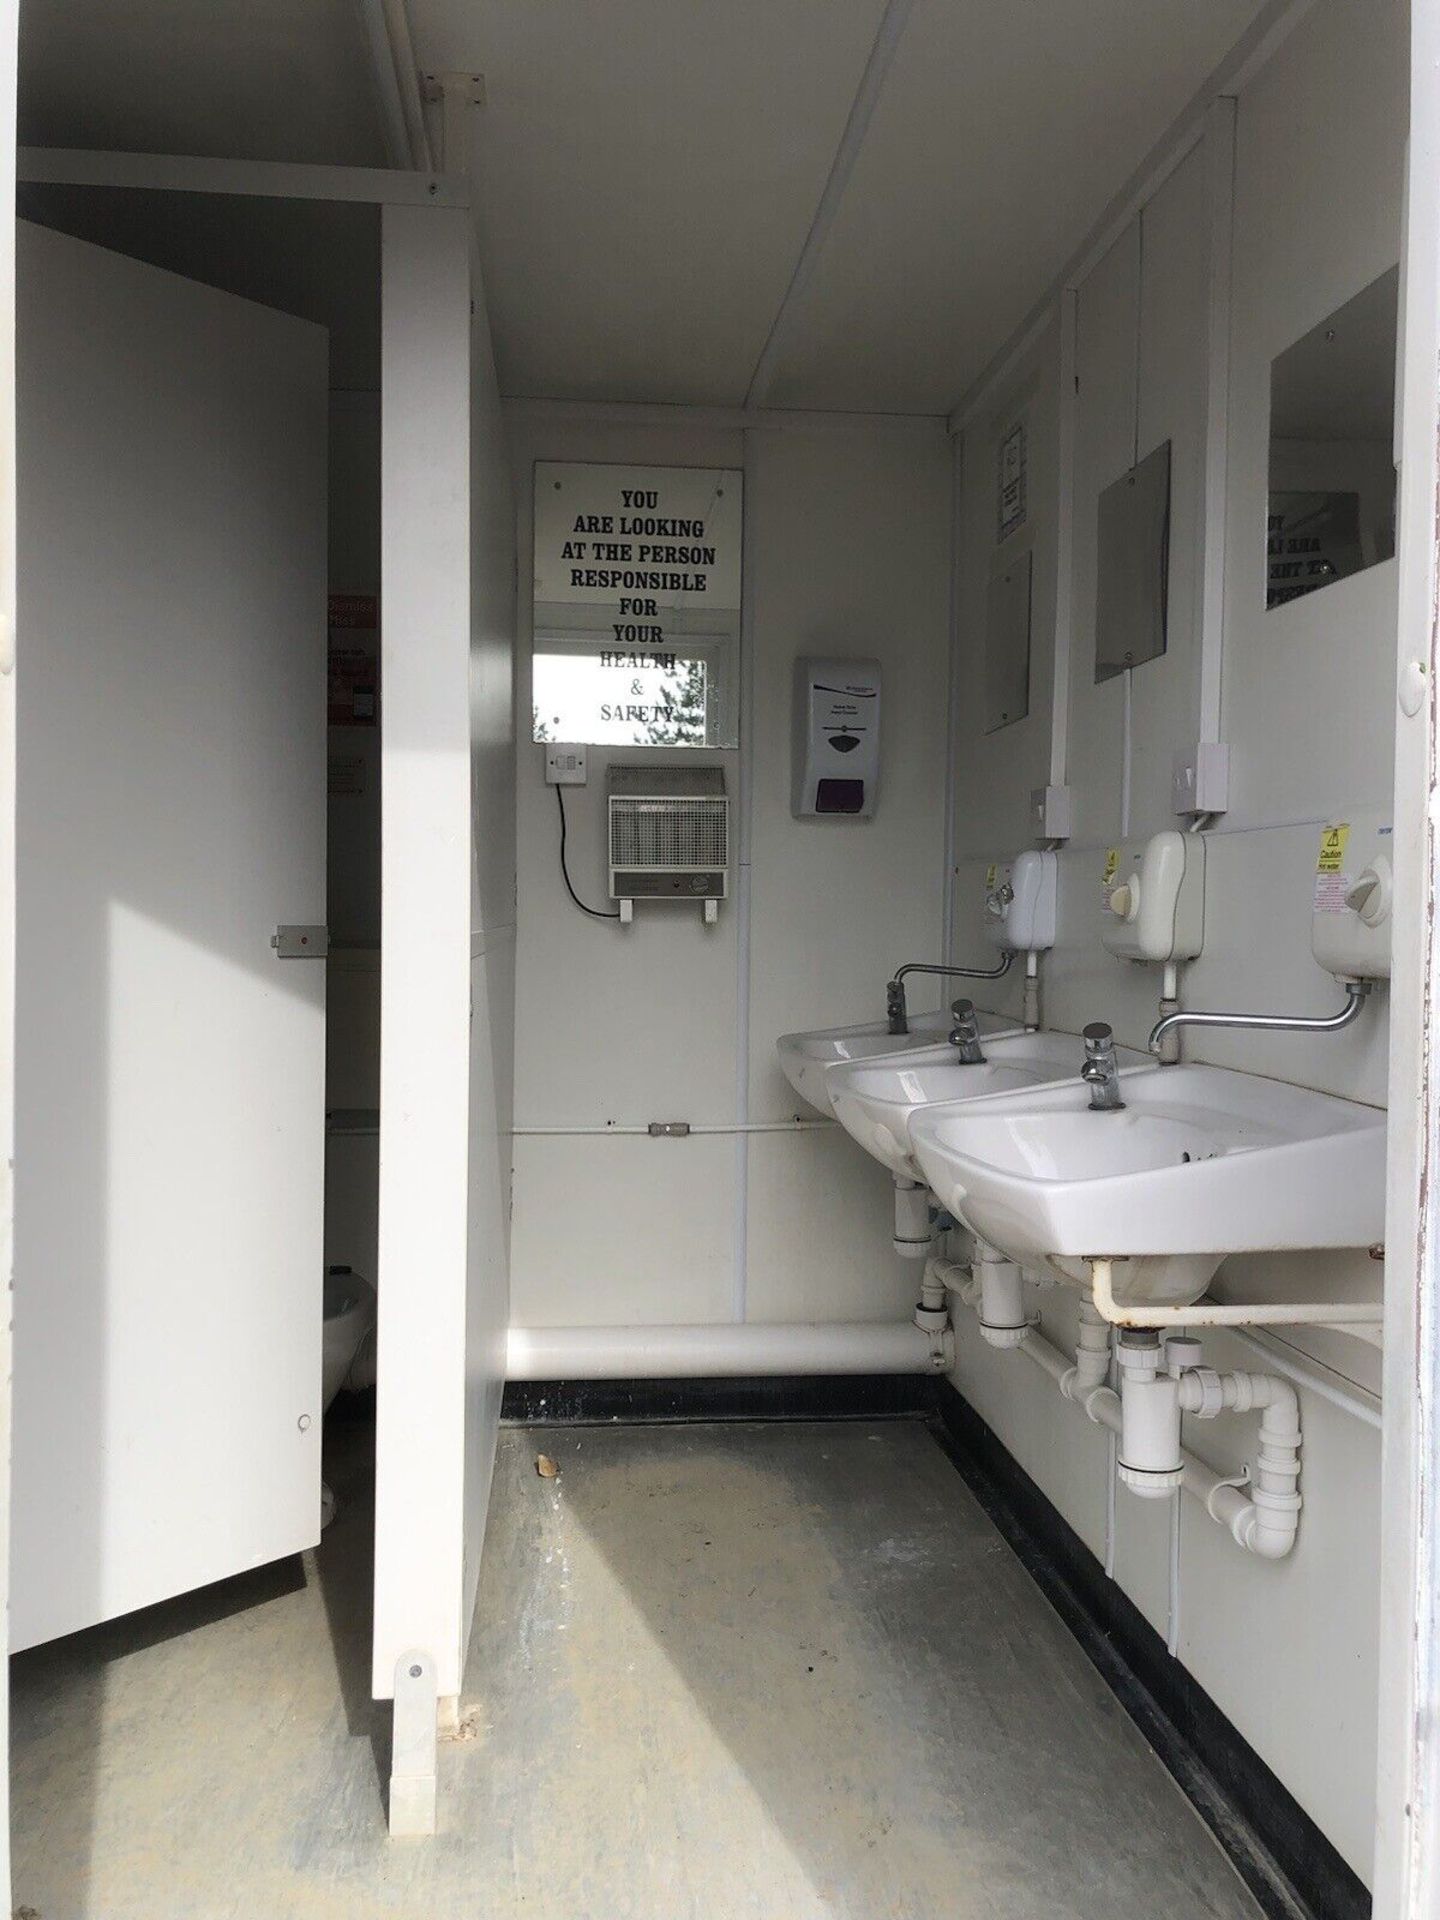 Portable Toilet Block With Shower Disabled Wheelchair Access - Image 2 of 10